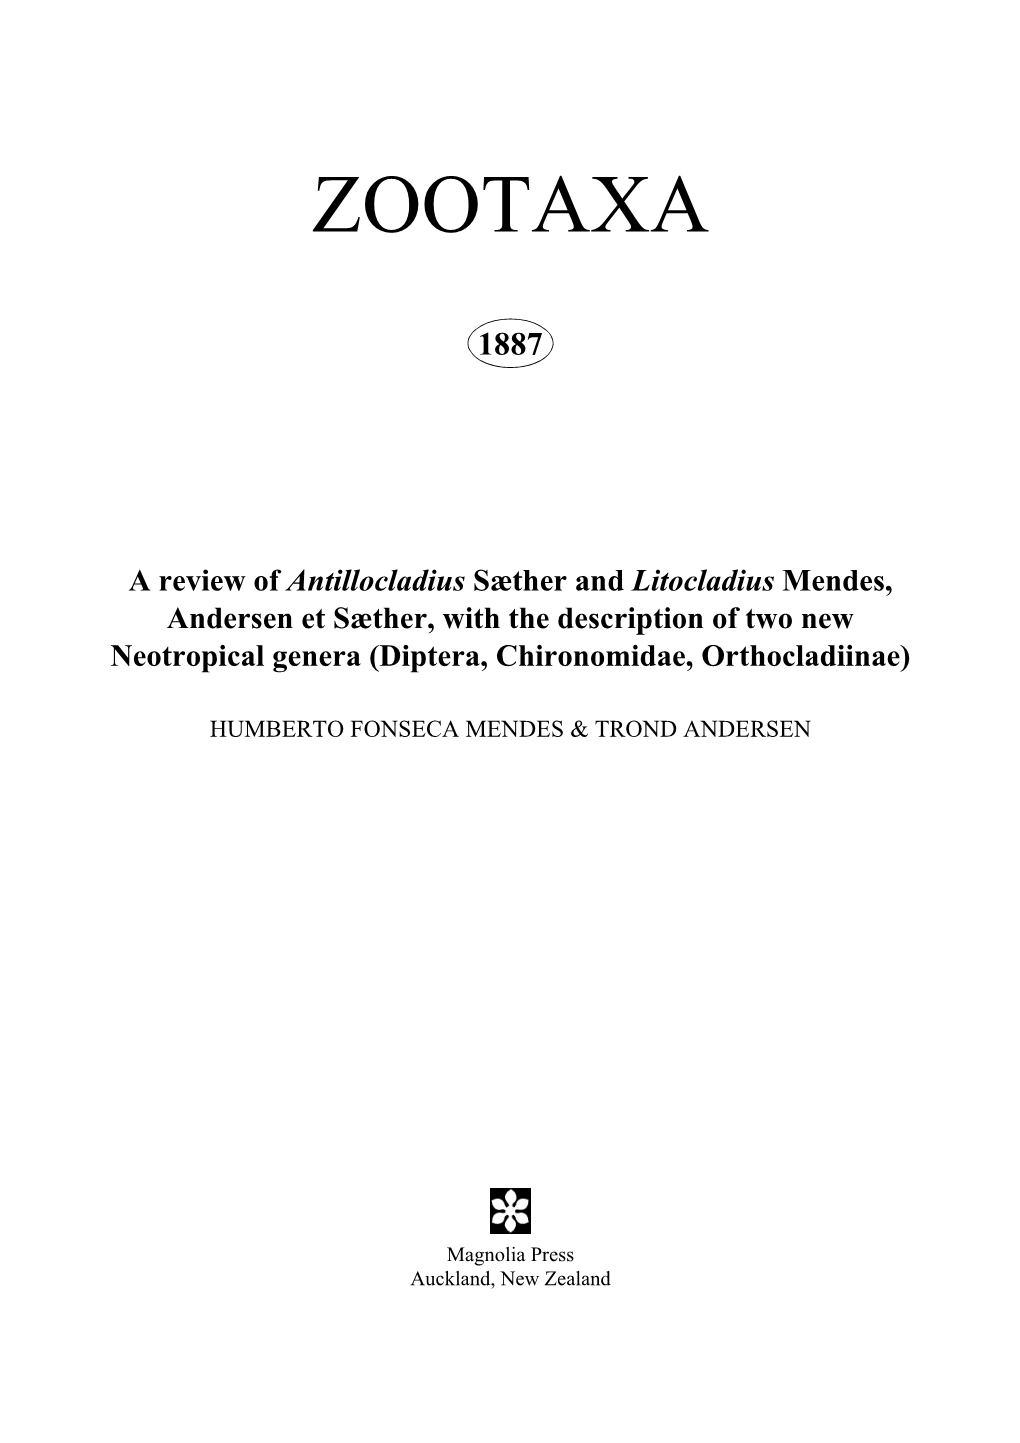 Zootaxa, a Review of Antillocladius S鎡her And